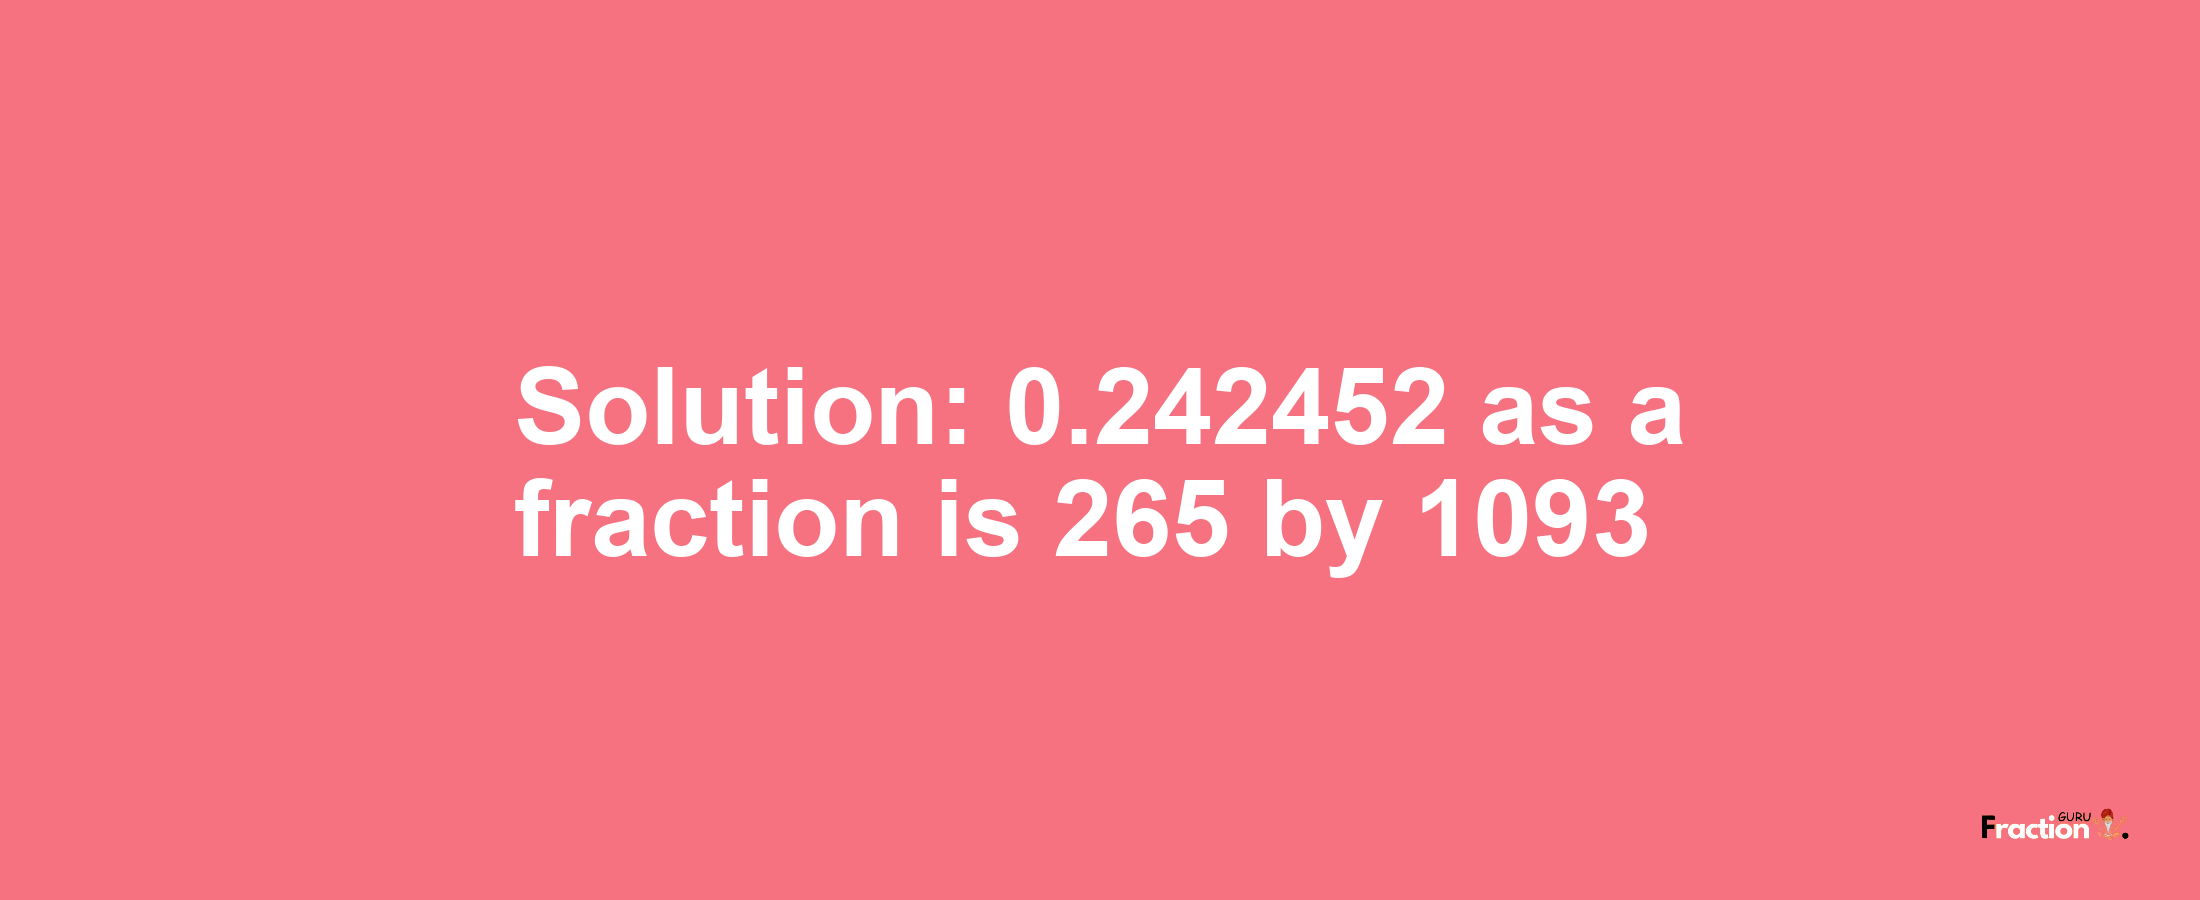 Solution:0.242452 as a fraction is 265/1093